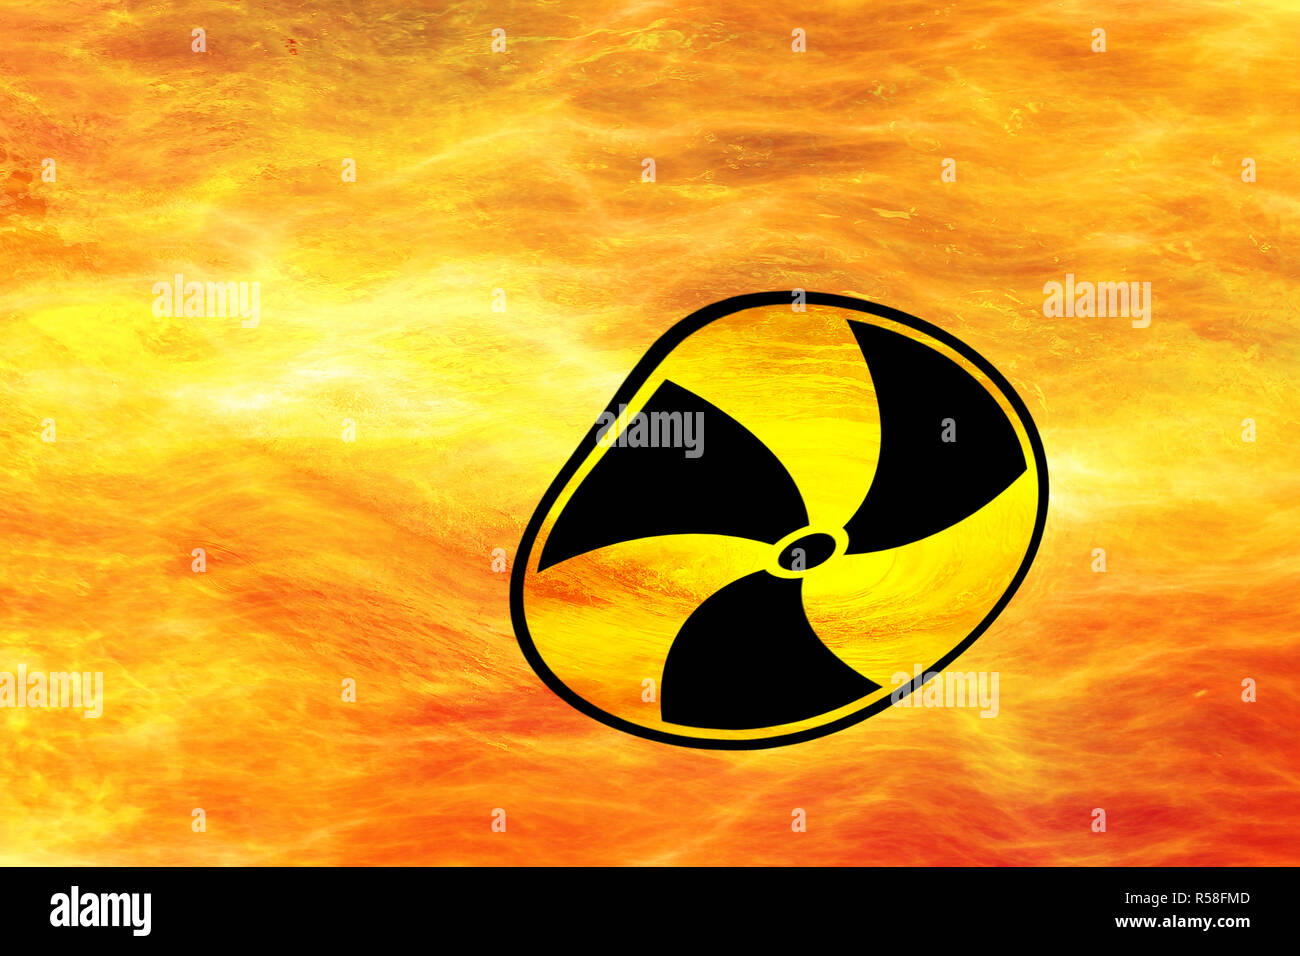 fire circles or whirlpools with warning signs of radioactivity Stock Photo